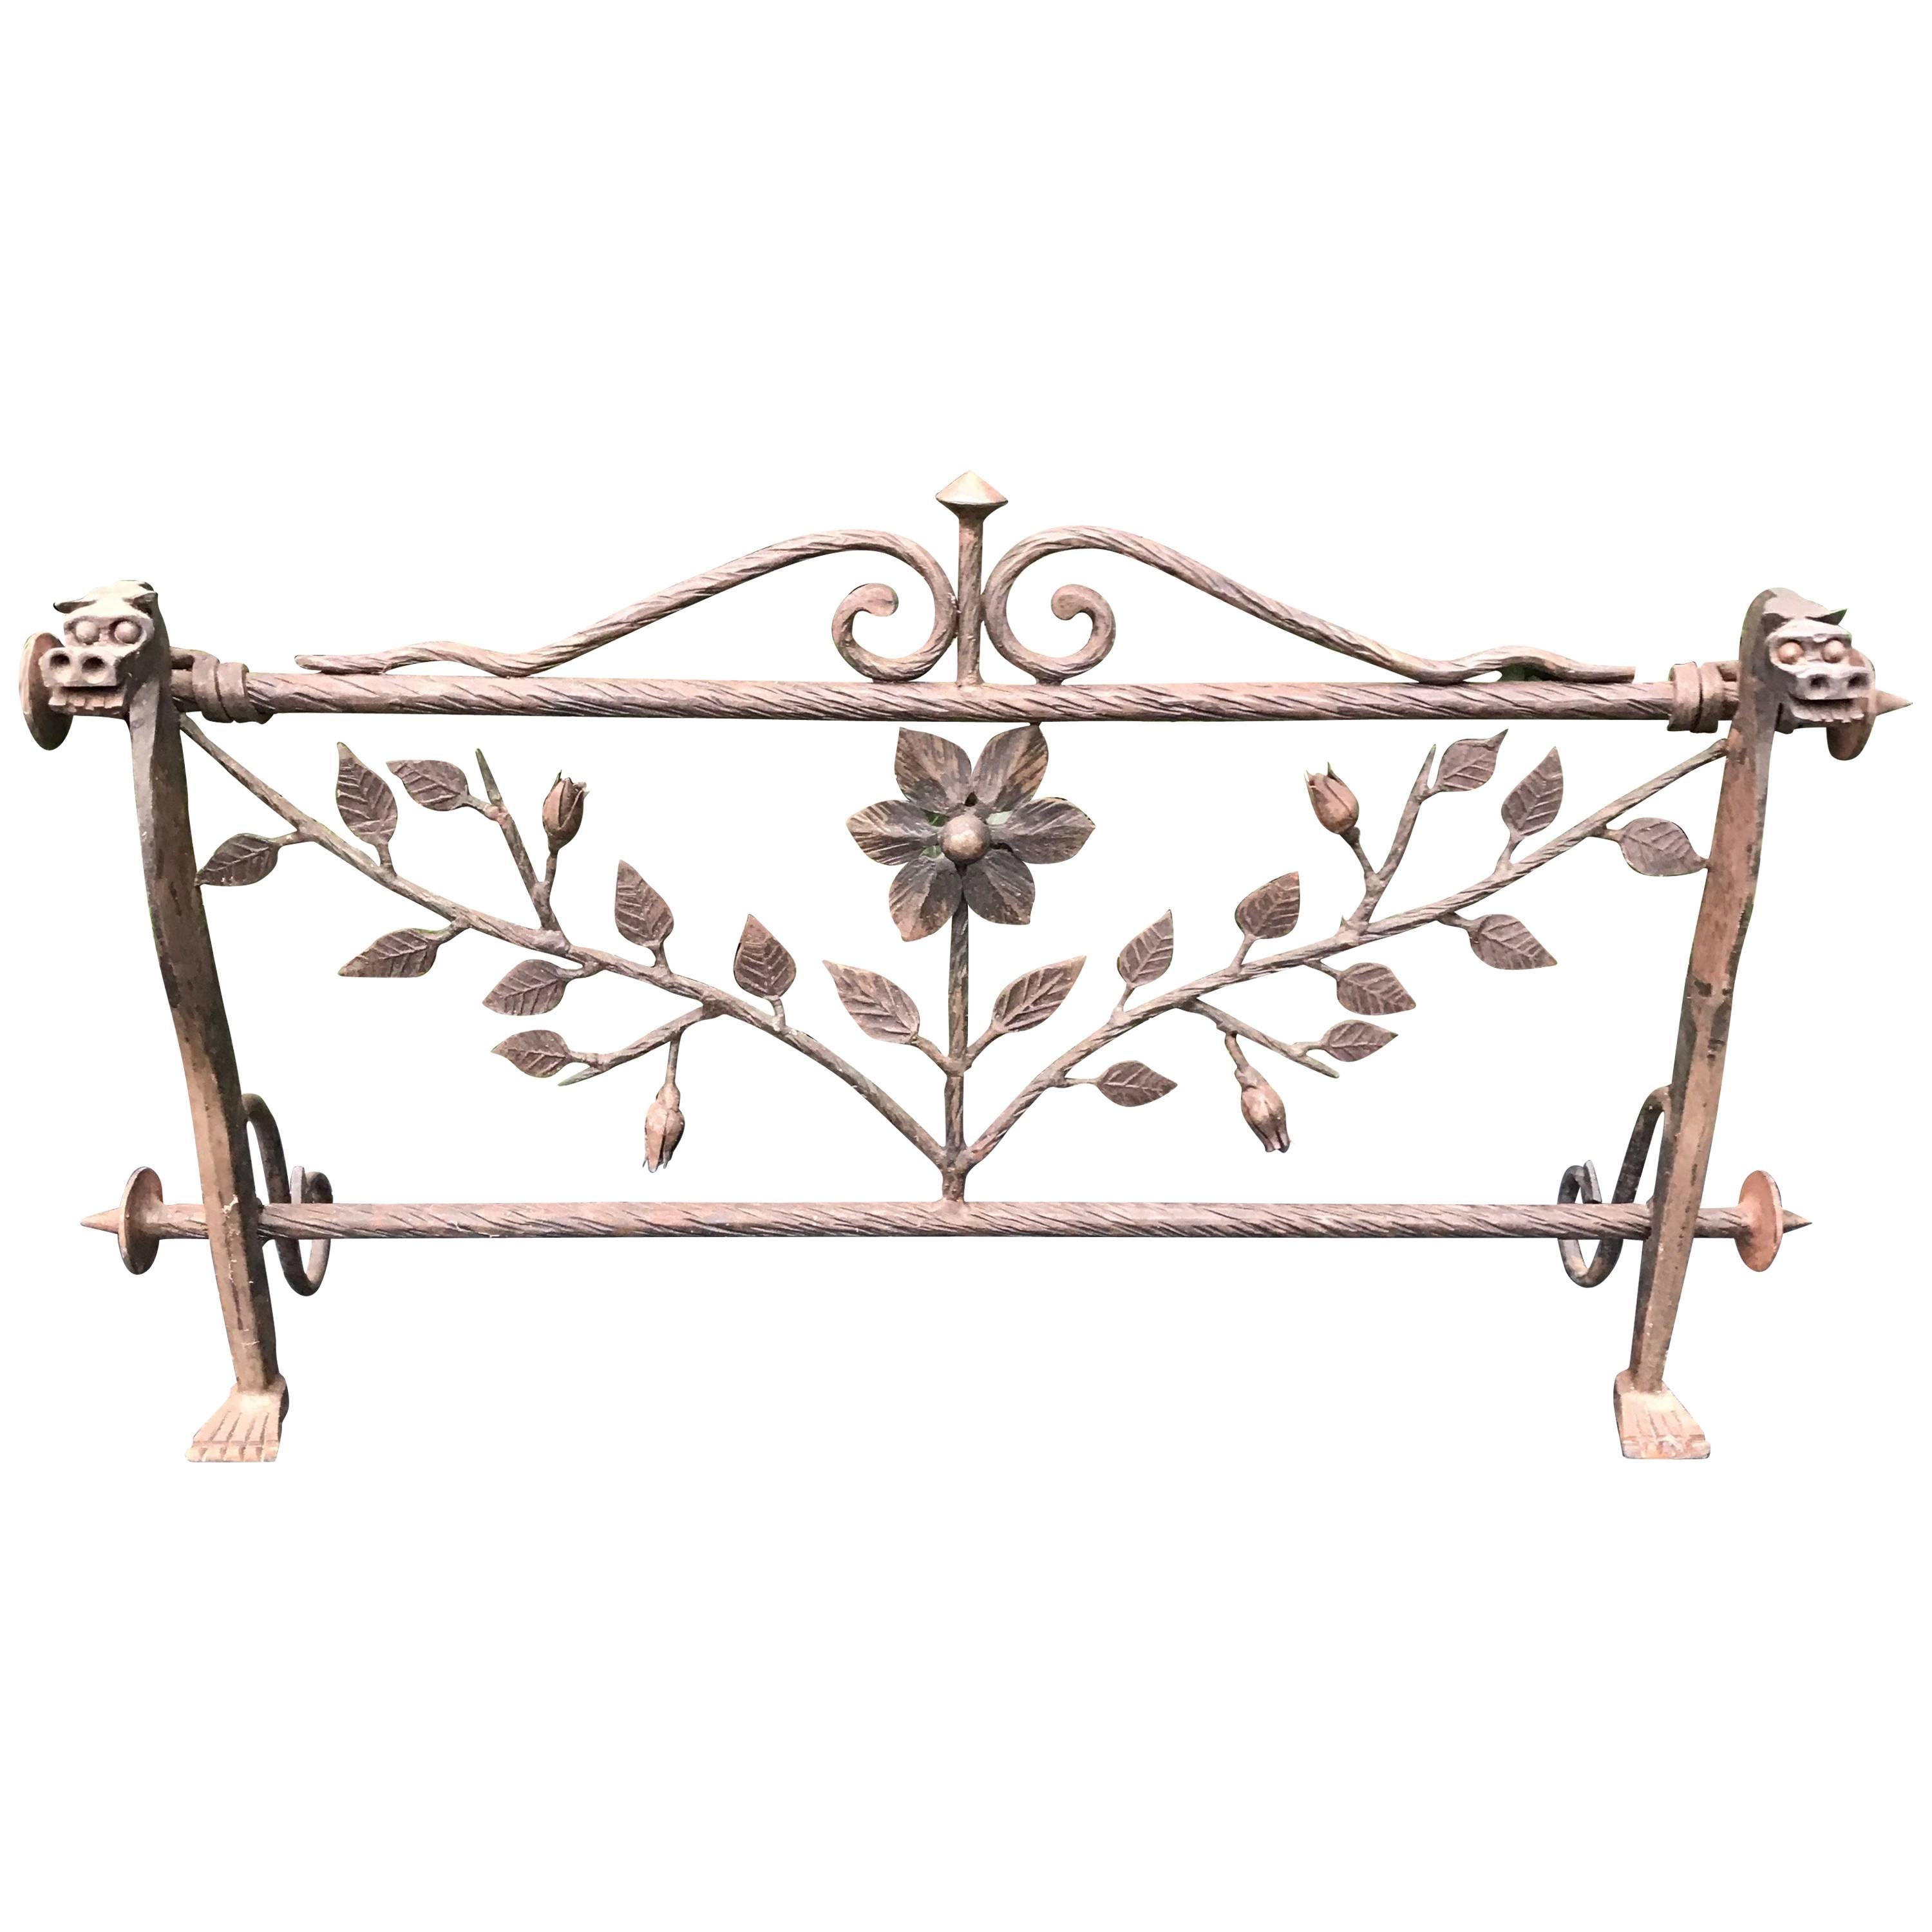 Early 1900 Forged in Fire Wrought Iron Fireplace Screen or Rack with Dragons